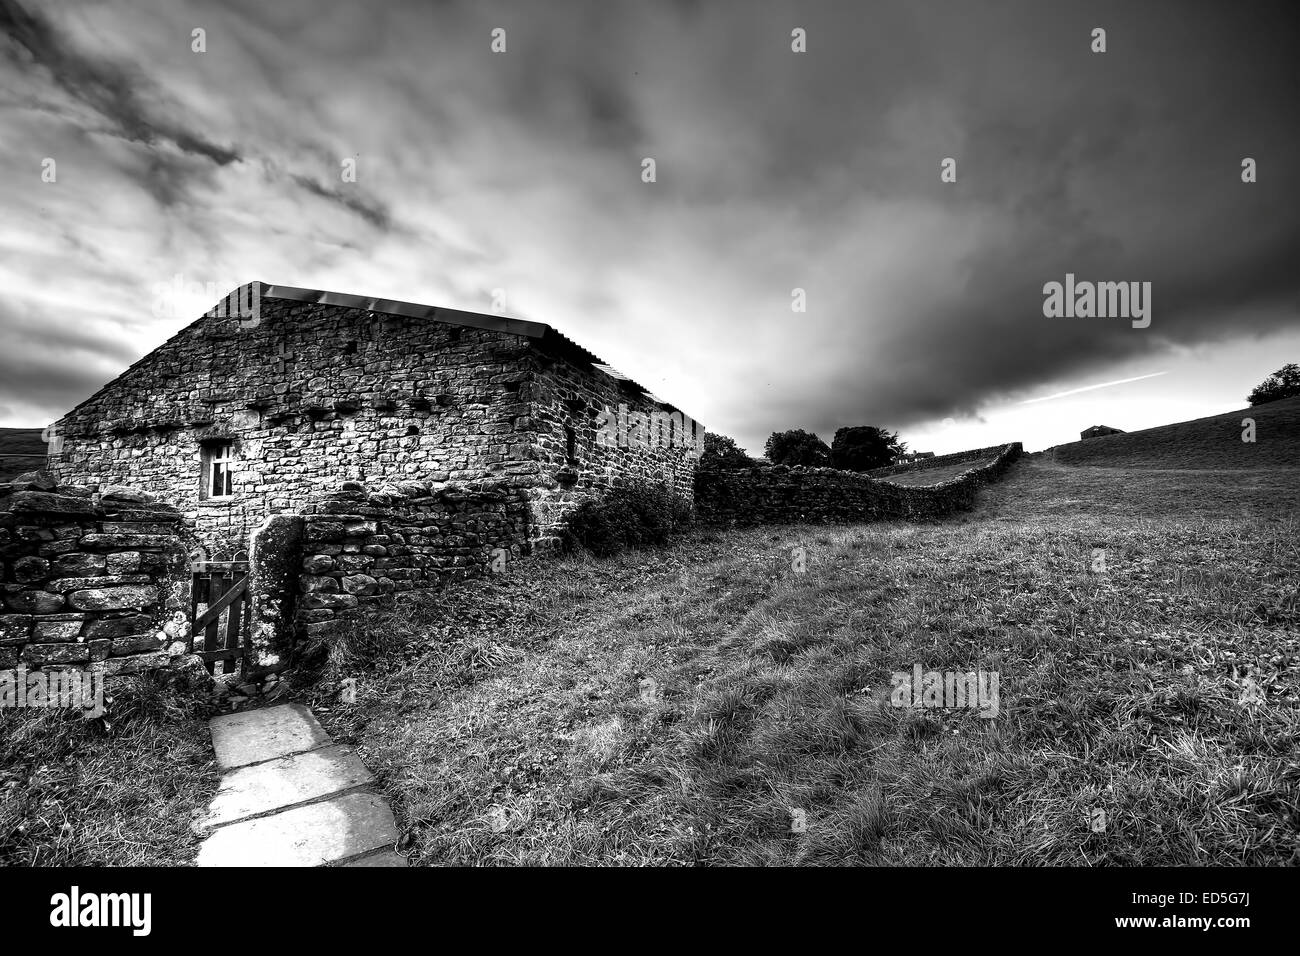 A Swaledale Barn as seen at Muker in the Yorkshire Dales National Park, North Yorkshire. Stock Photo